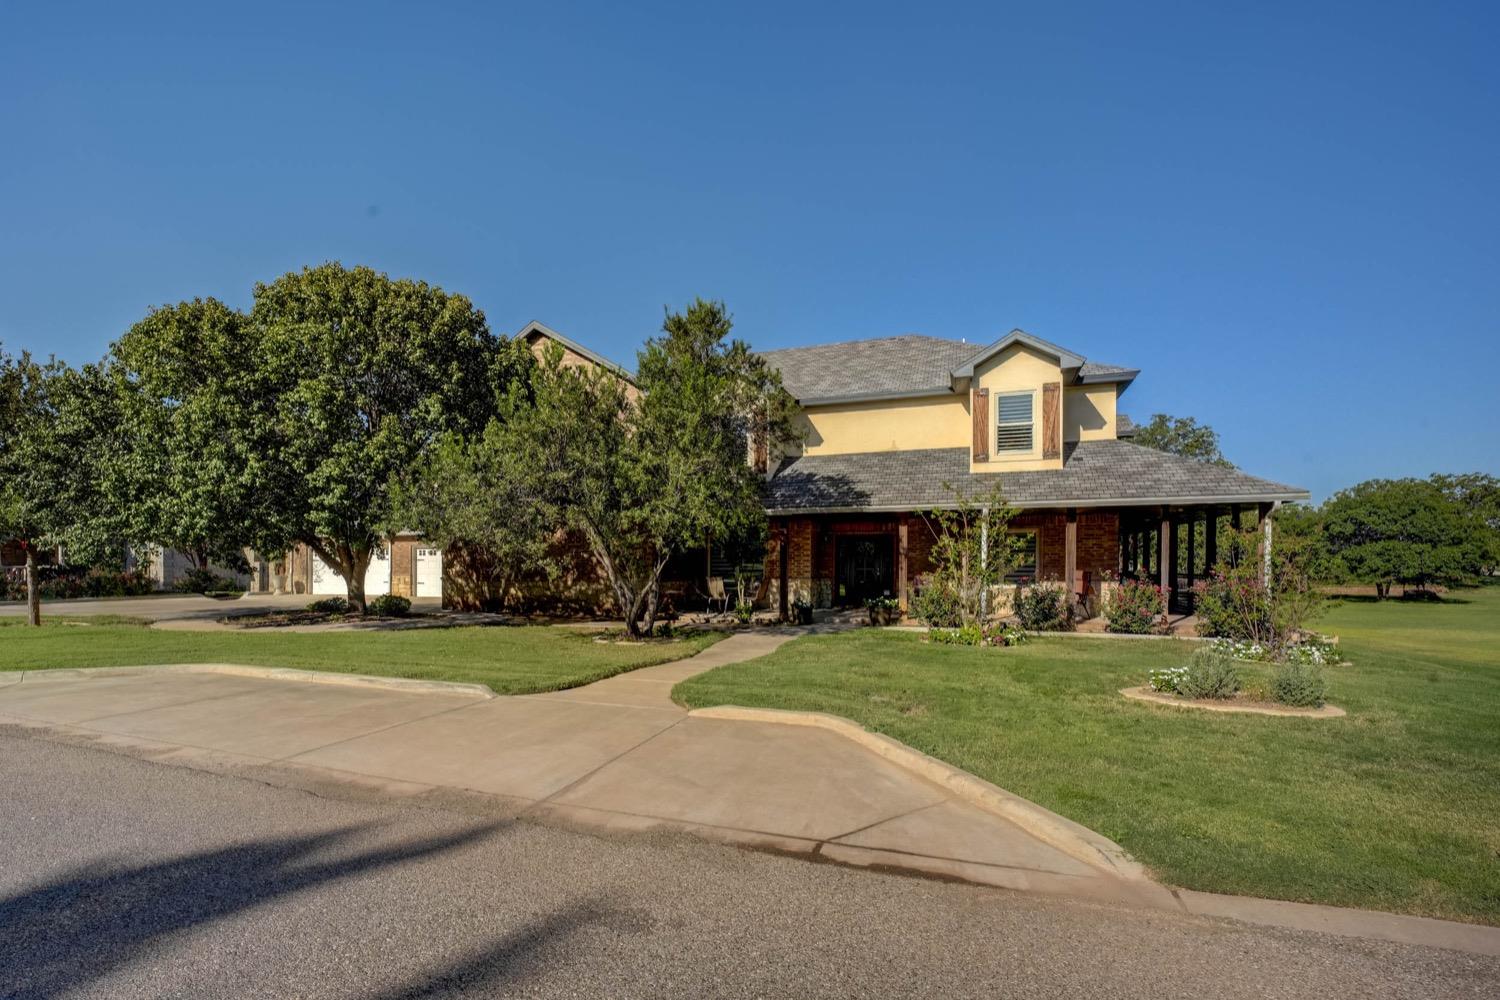 Just a walk away from Lubbock Country Club, this STUNNING home is a must-see! 6000+ sq/ft of beauty!! Walk in and fall in love. So many entertaining options! This gorgeous home has it all plus some, including 2 master suites and a third bedroom with its own ensuite bath, two kitchens, a basement, separate movie theater room, large laundry/utility room, mudroom and multiple living areas. The master boasts huge his and hers closets. The awesome wrap-around porch is the perfect place to sit and enjoy your morning coffee. And don't miss the private patio off of the downstairs master suite. You won't find anything like this in Lubbock! Beautifully finished out and completely renovated; this one-of-a-kind STUNNER could be yours!!